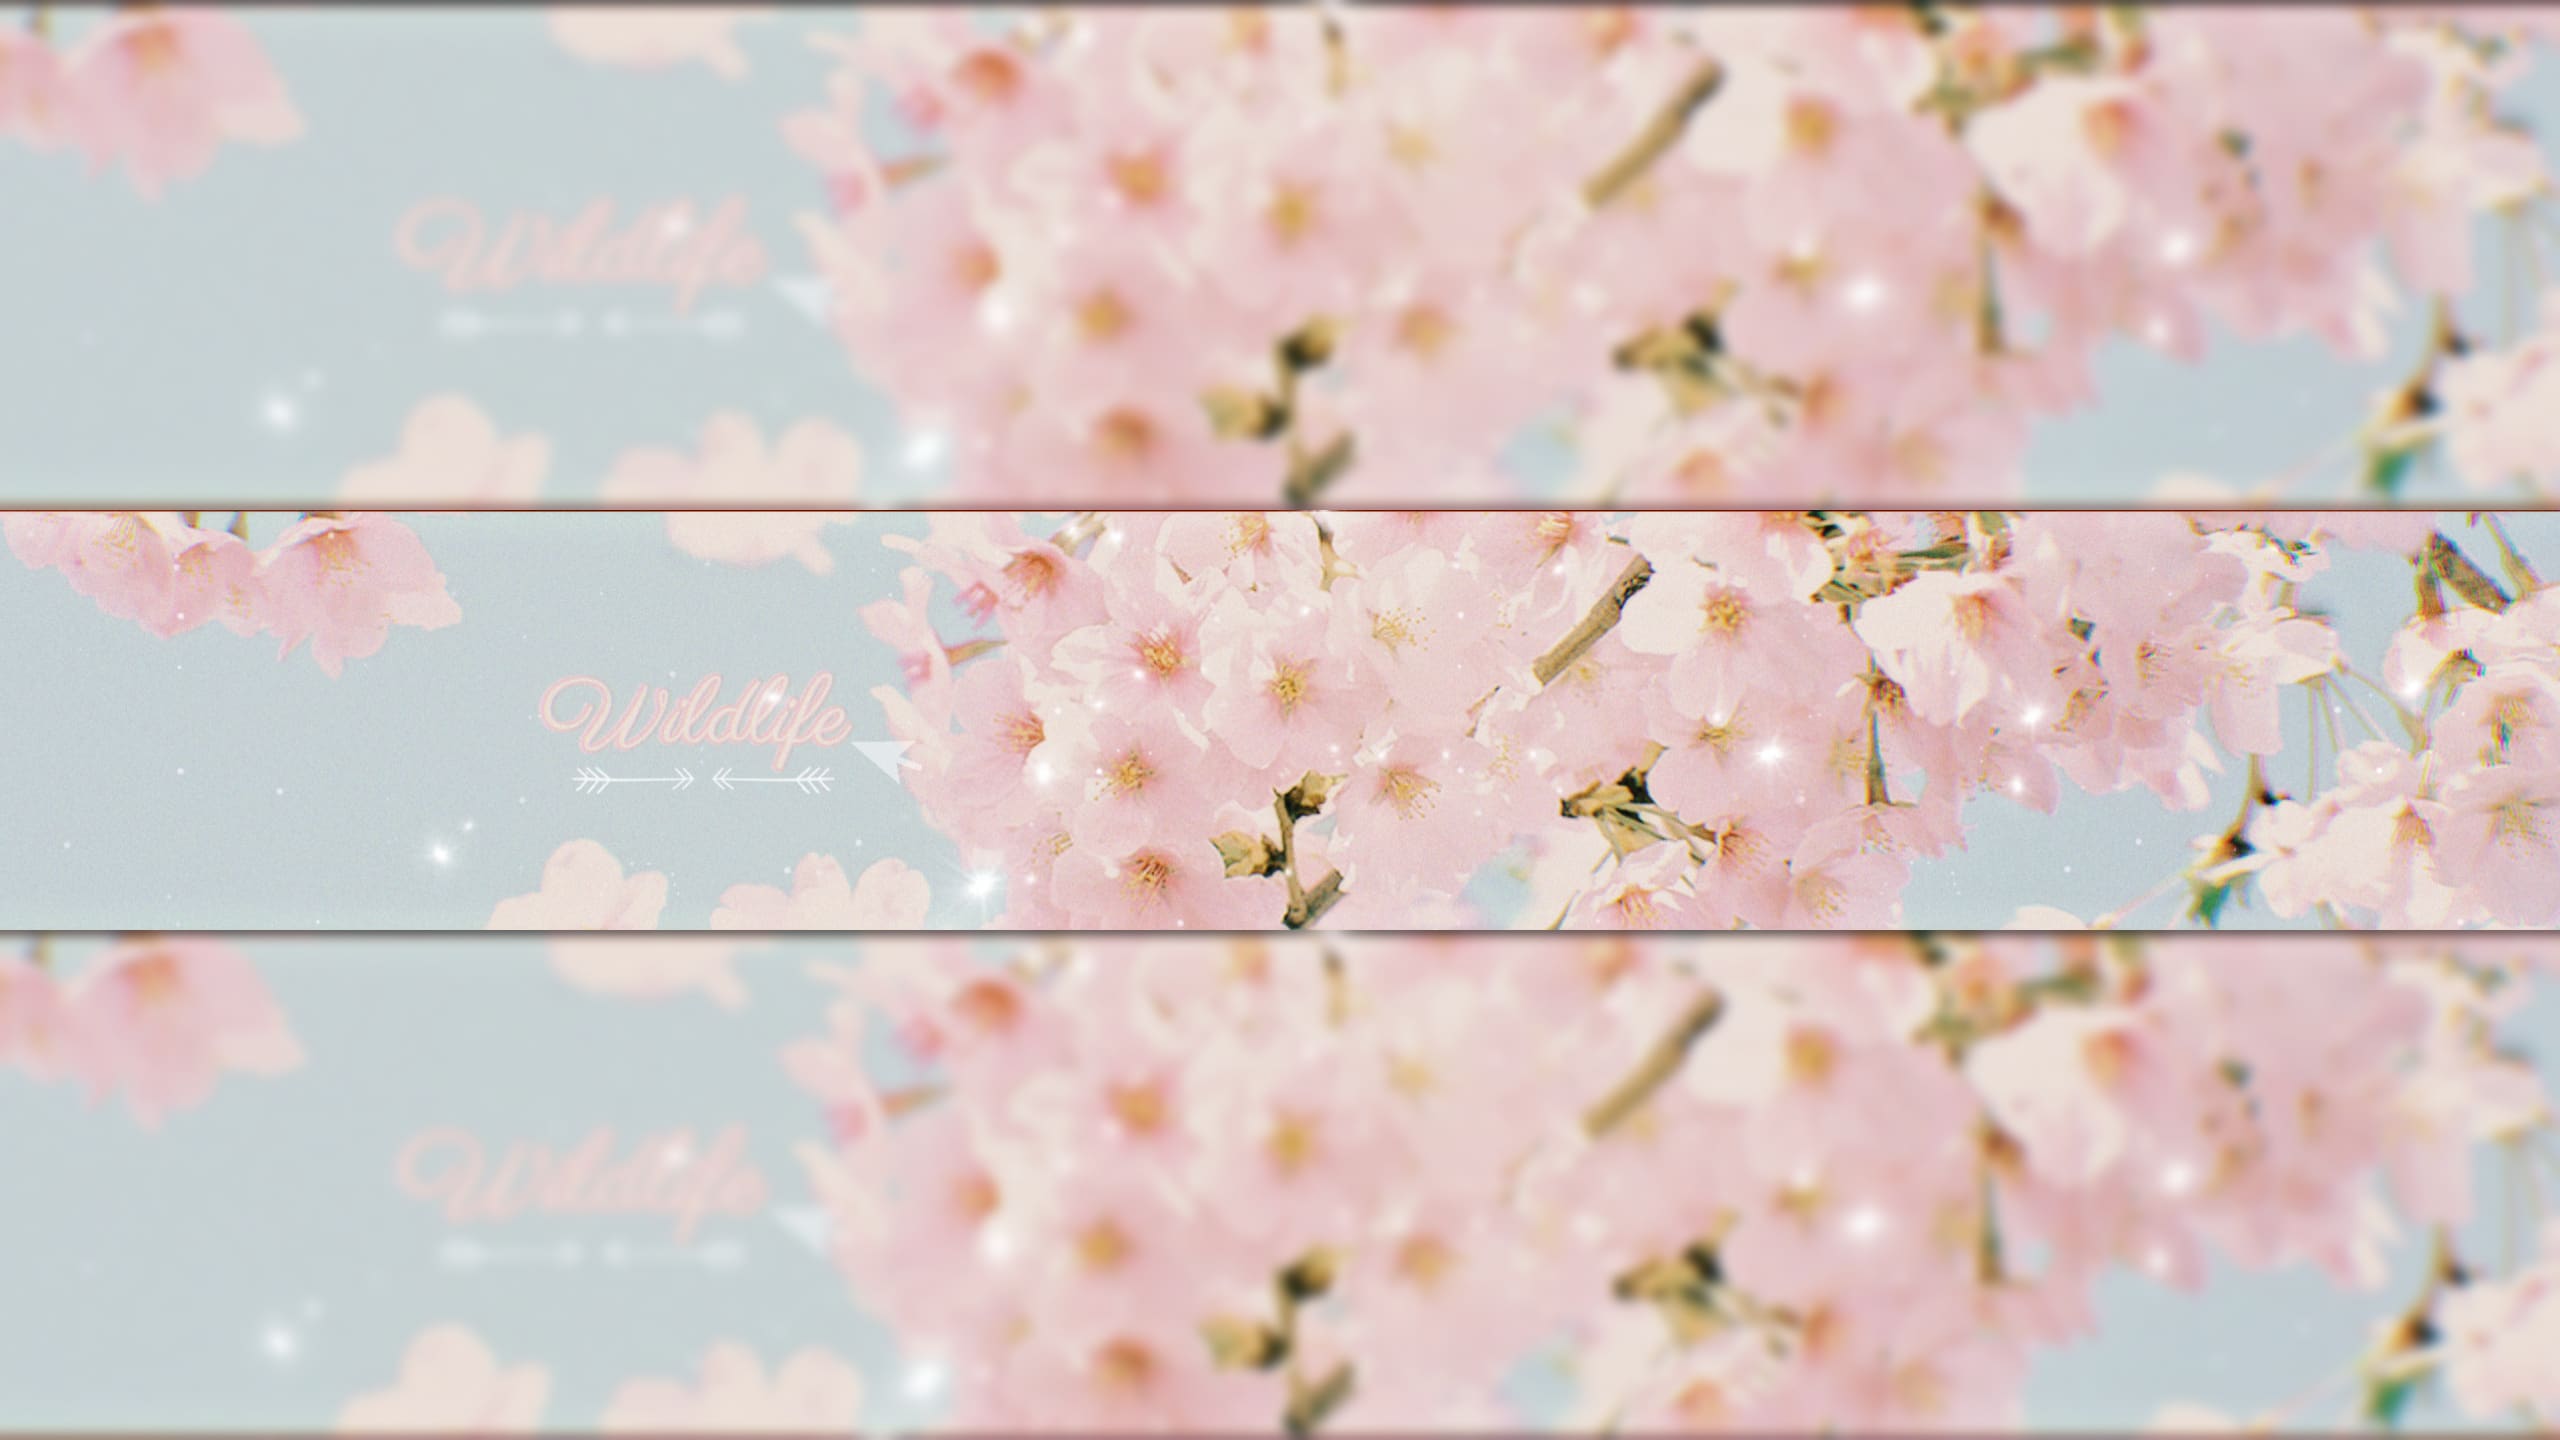 AnimeAesthetic on Twitter Strictly Retweet and fav if you saved  Anime  header pink aesthetic cute httpstcoFwMLmcIpsx  X